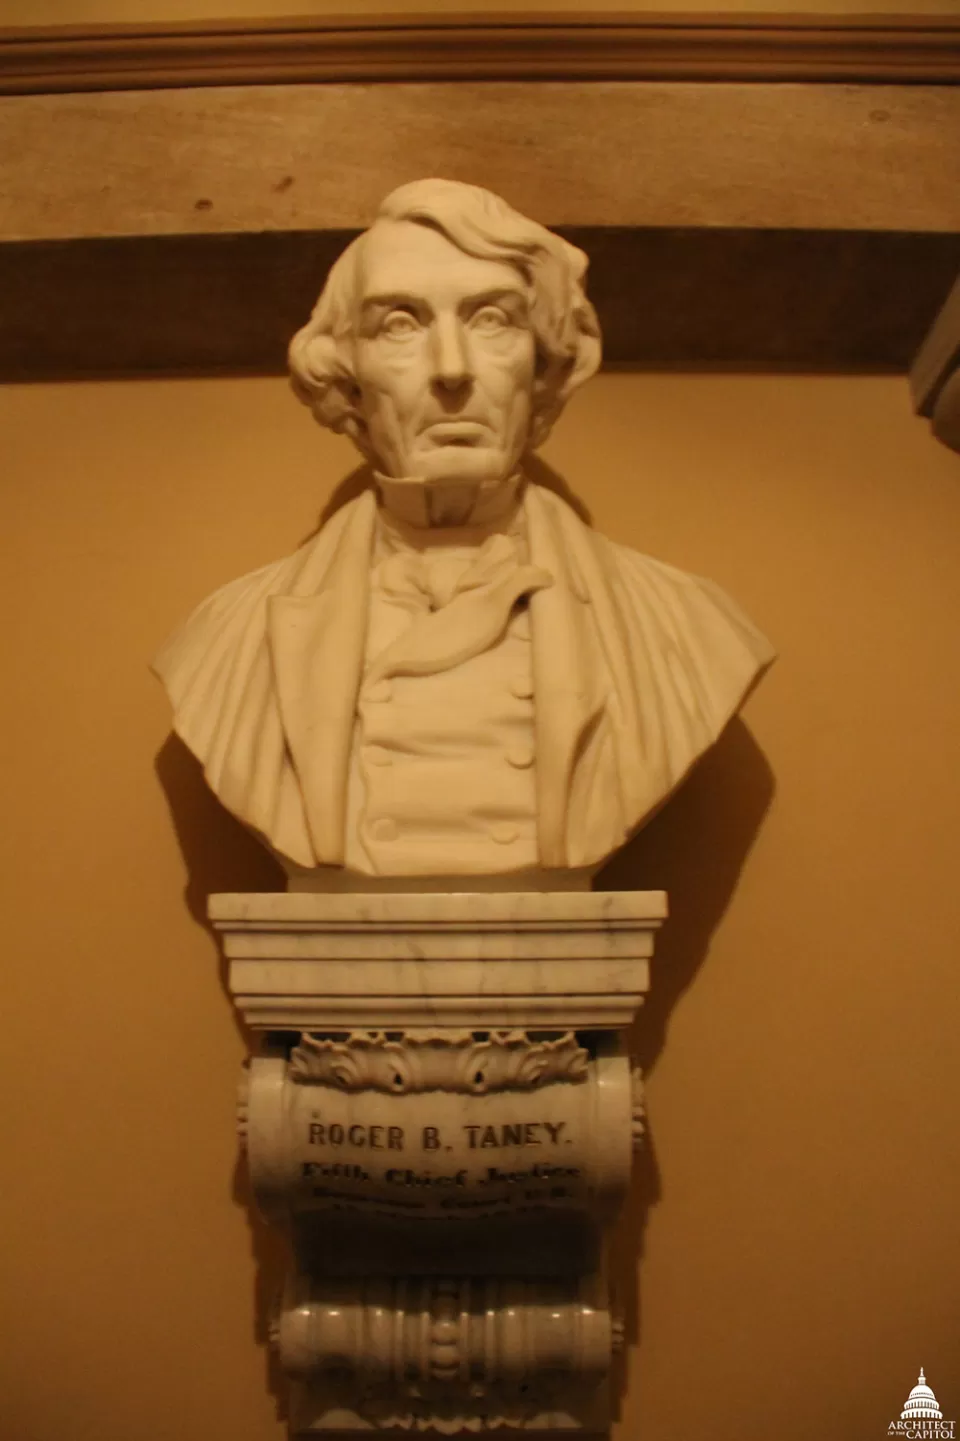 Bust of Roger B. Taney in the Old Supreme Court Chamber of the U.S. Capitol